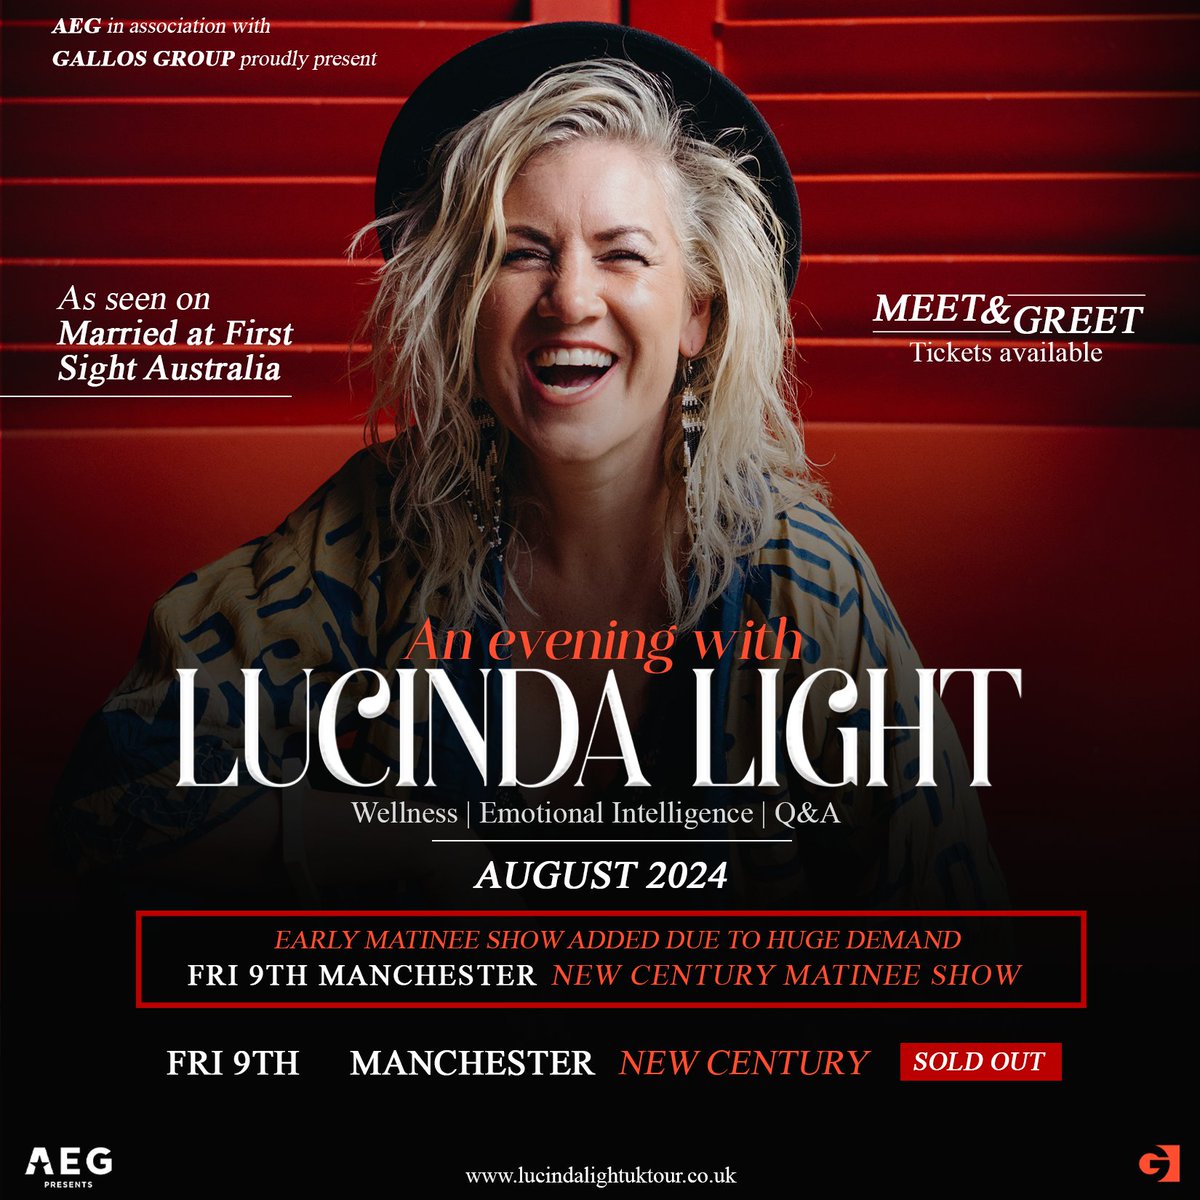 EARLY MATINEE SHOW ADDED DUE TO HUGE DEMAND! Lucinda Light | August 2024 | @NCHMCR aegp.uk/Lucinda24